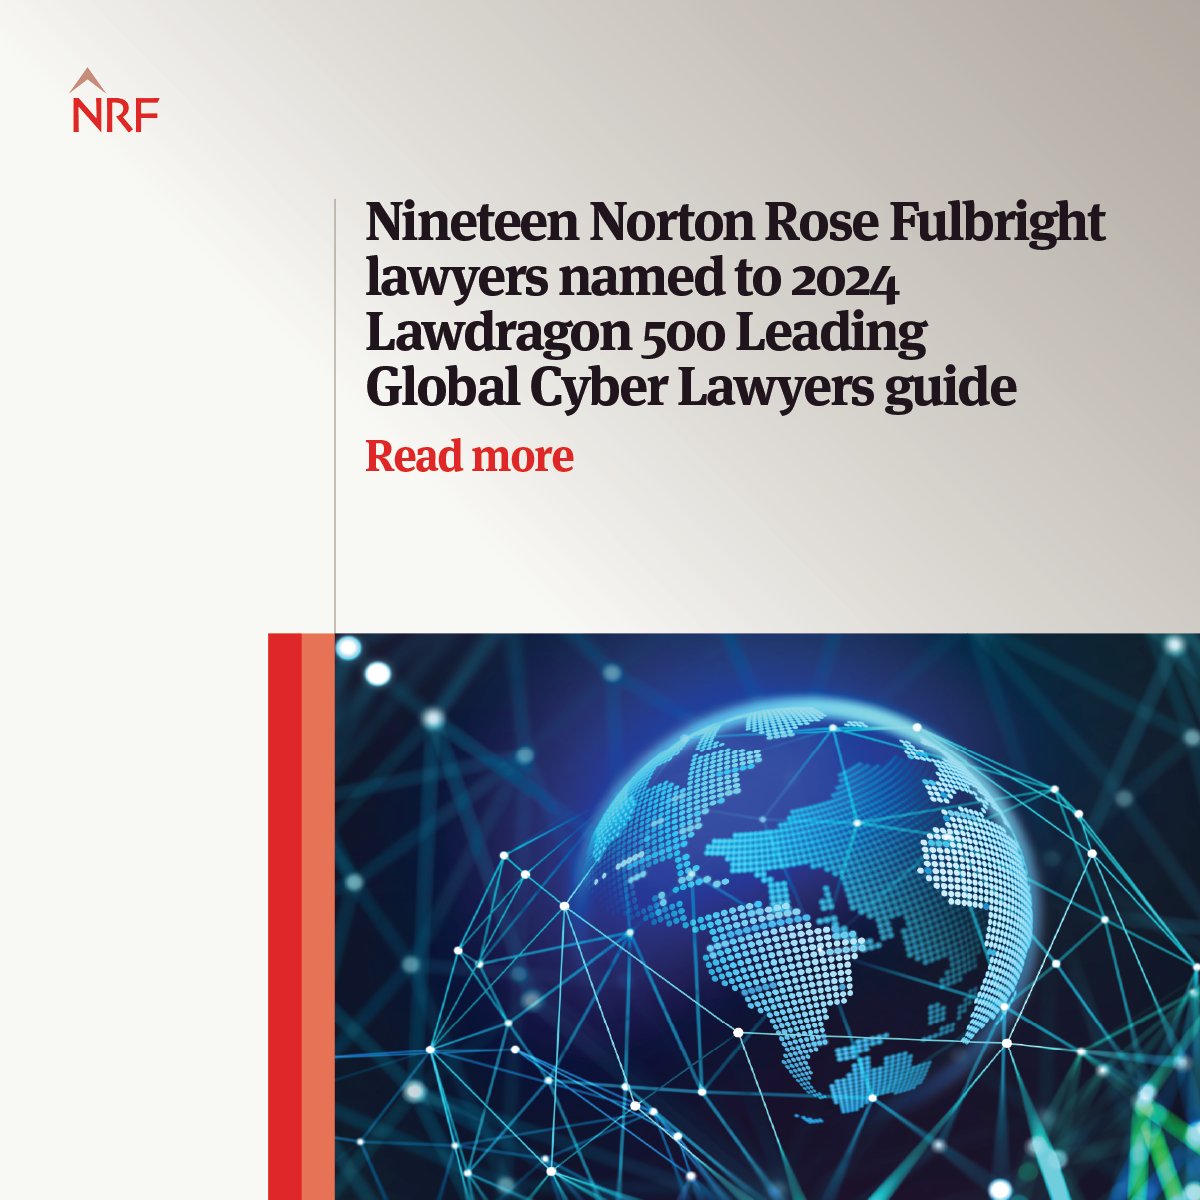 We’re proud to announce that 19 of the firm’s lawyers spanning multiple regions have been included in the 2024 Lawdragon 500 Leading Global Cyber Lawyers guide. ow.ly/3gRq50Rrf3Y